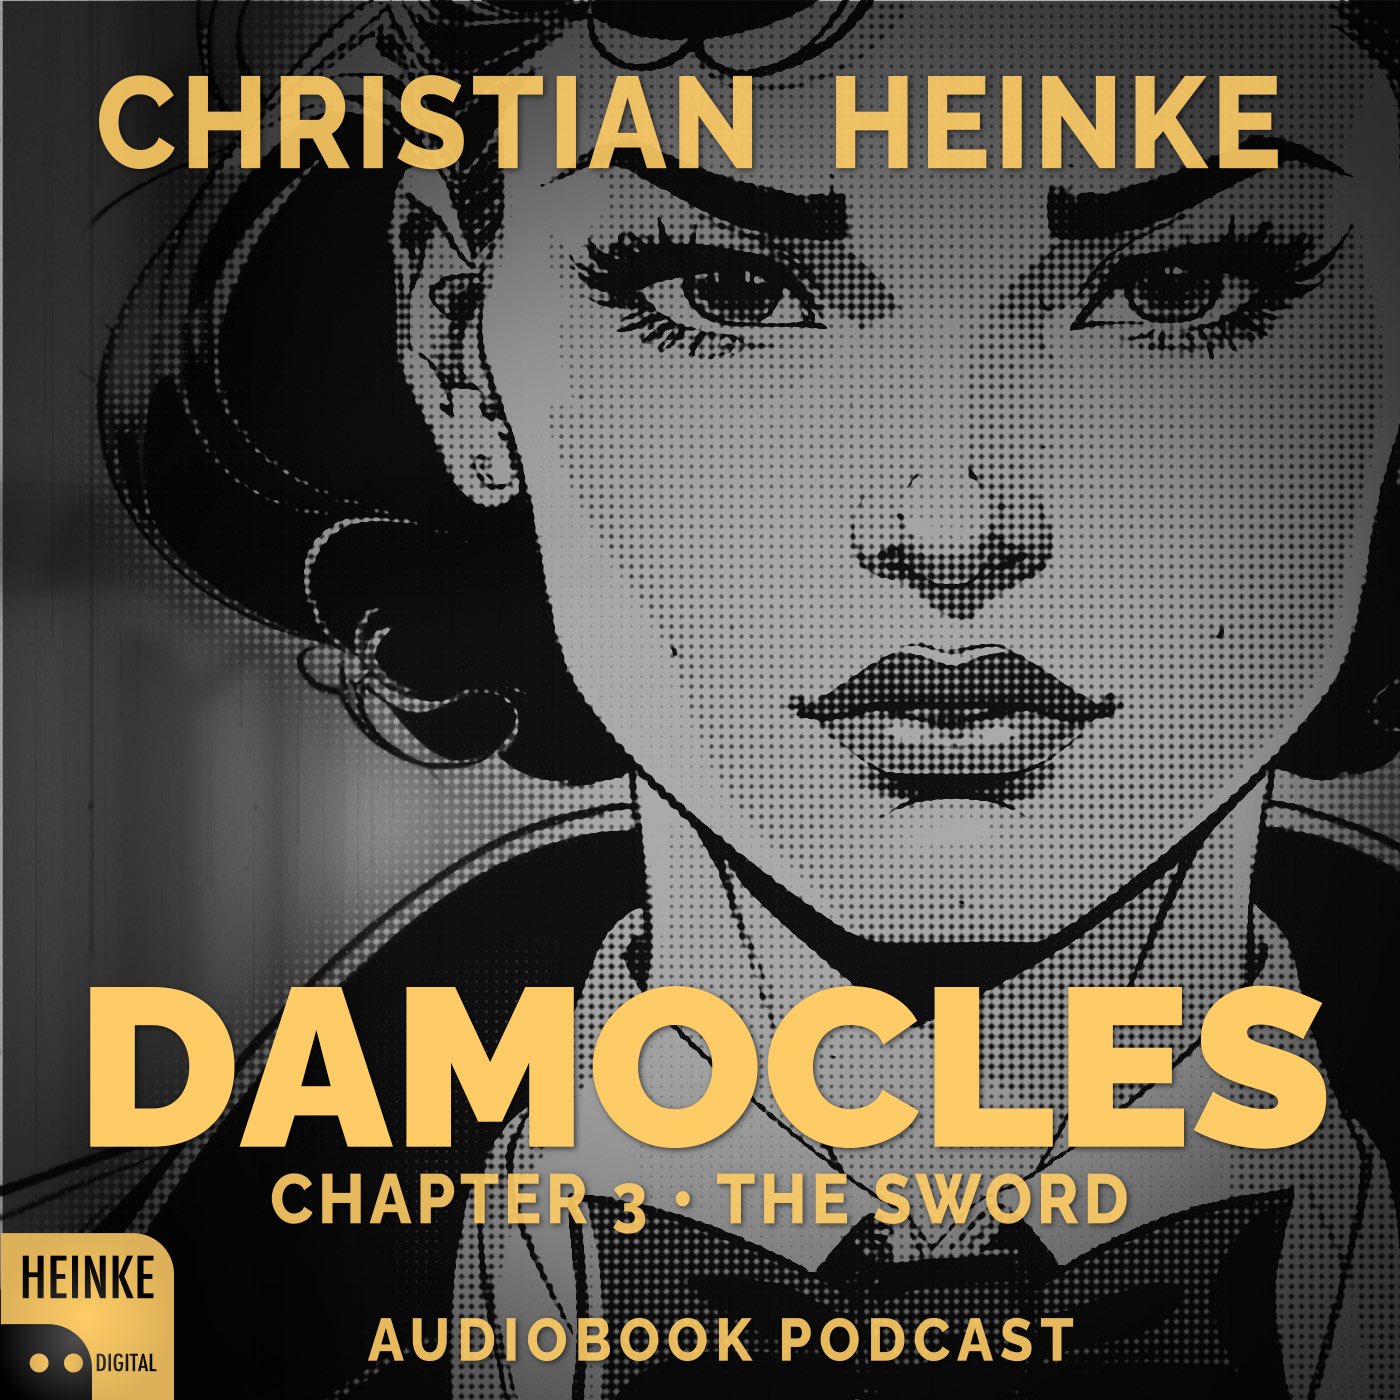 Damocles - Chapter 3 - The Sword